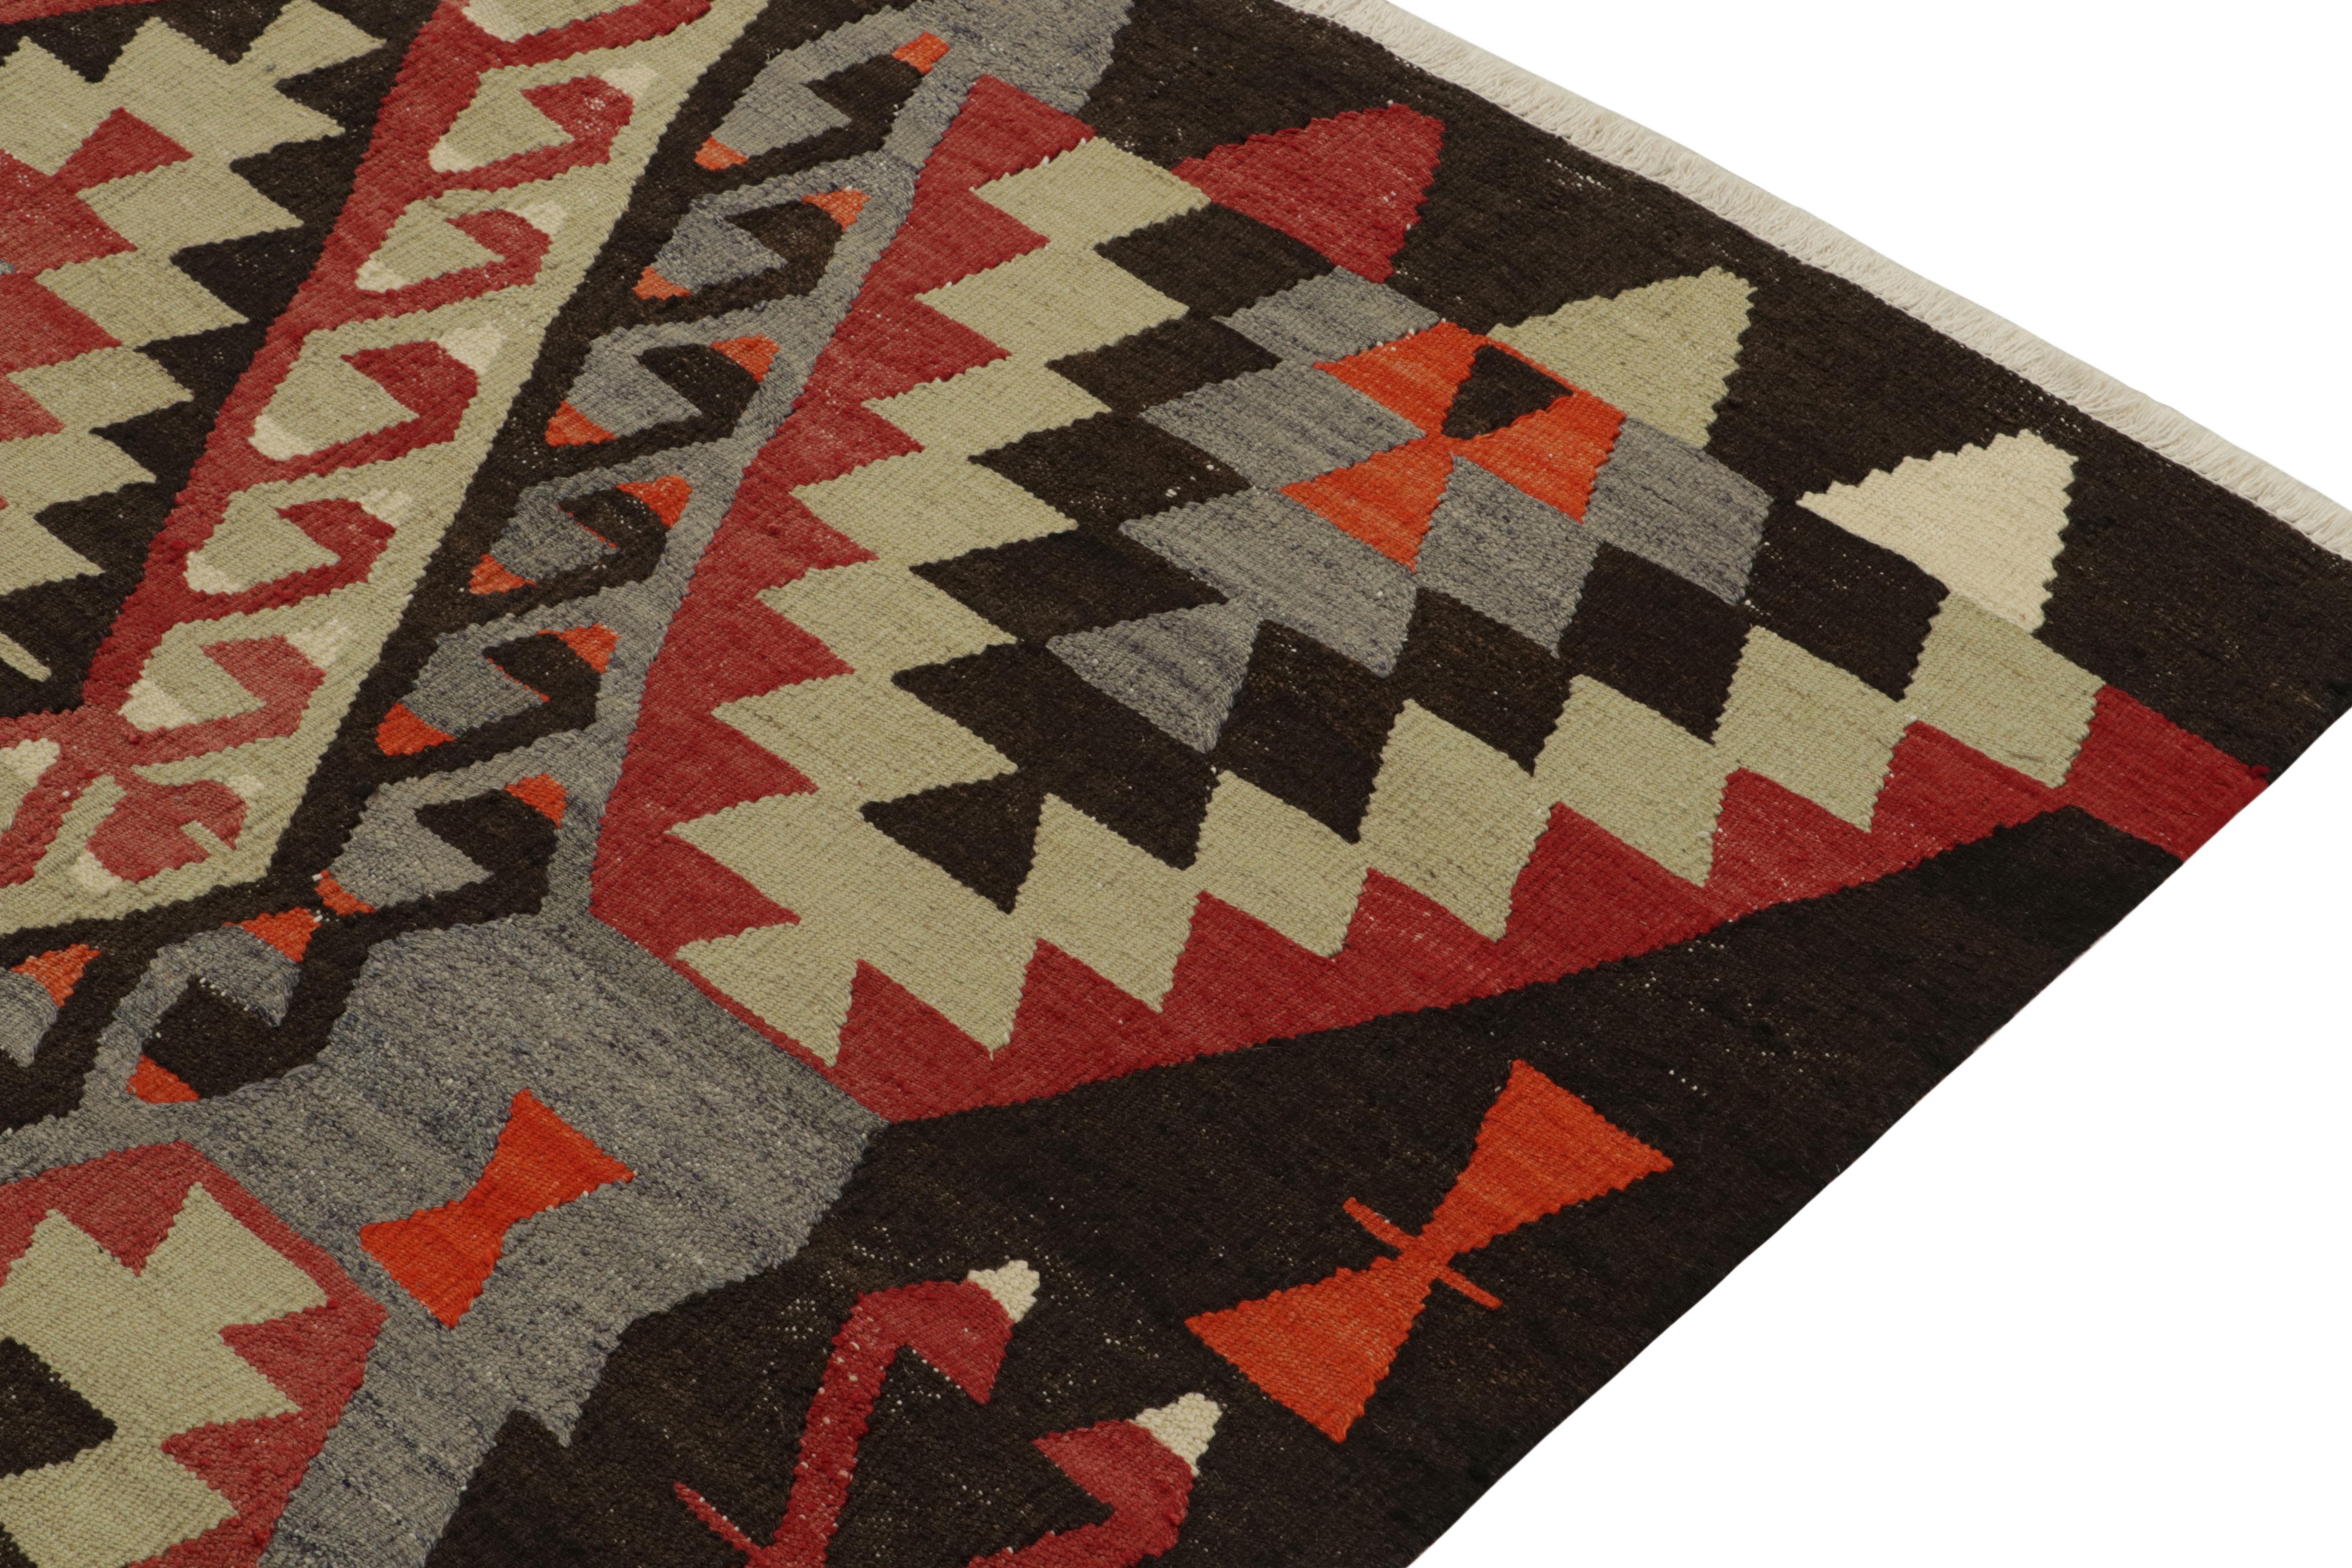 Hand-Woven 1940s Vintage Kilim in Blue, Red and Beige-Brown Tribal pattern by Rug & Kilim For Sale